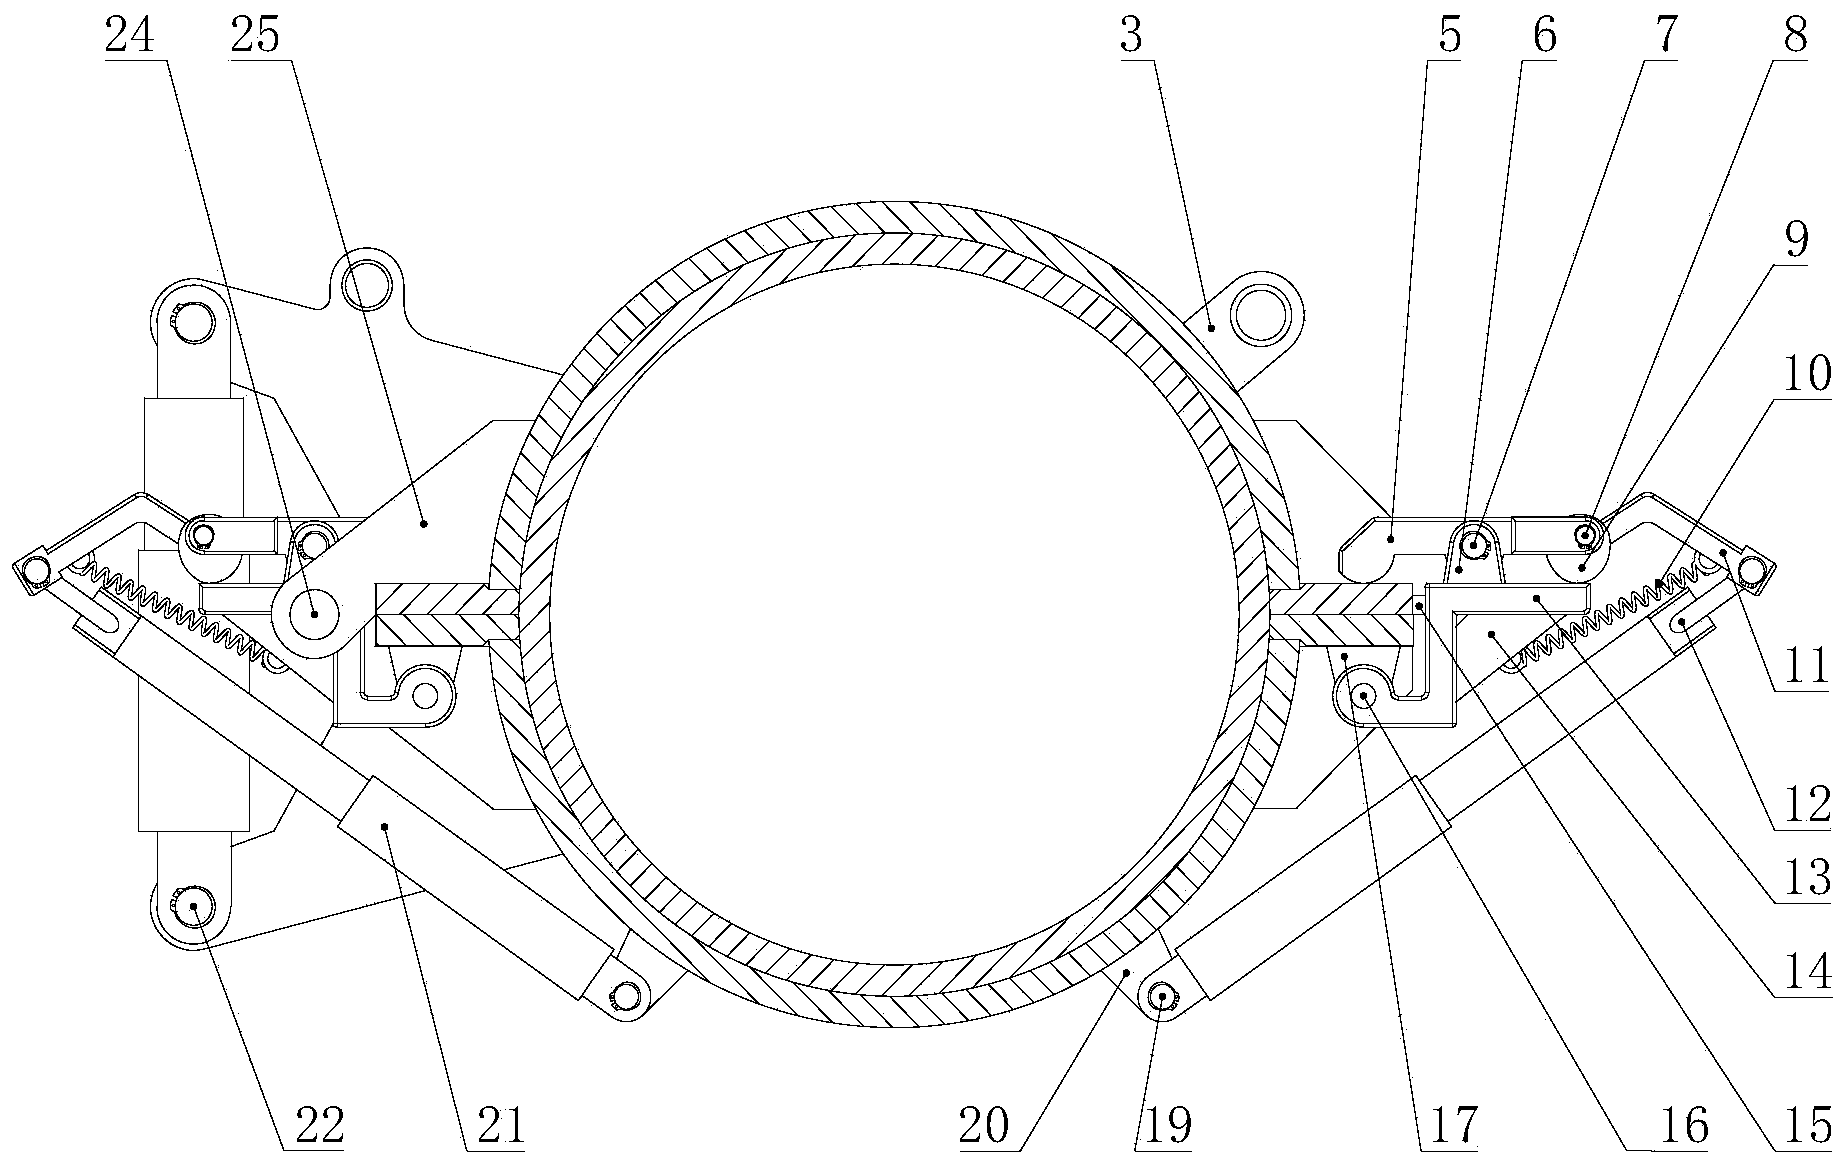 Full-automatic clamping hoop used for seabed jacket repairing